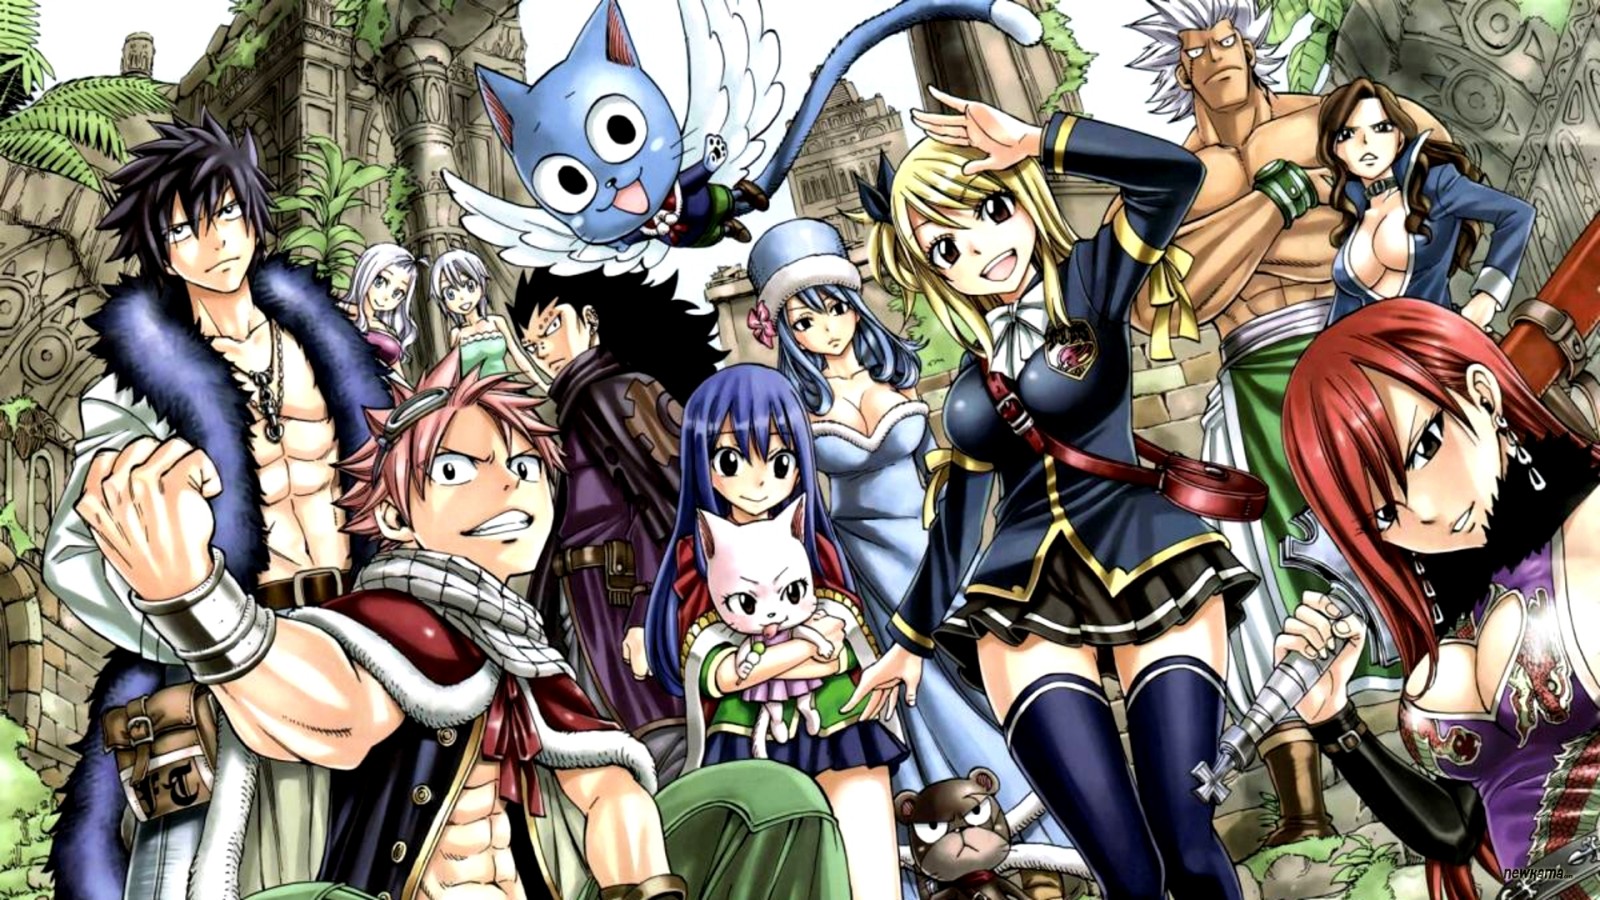 fairy tail wallpaper hd free download #1